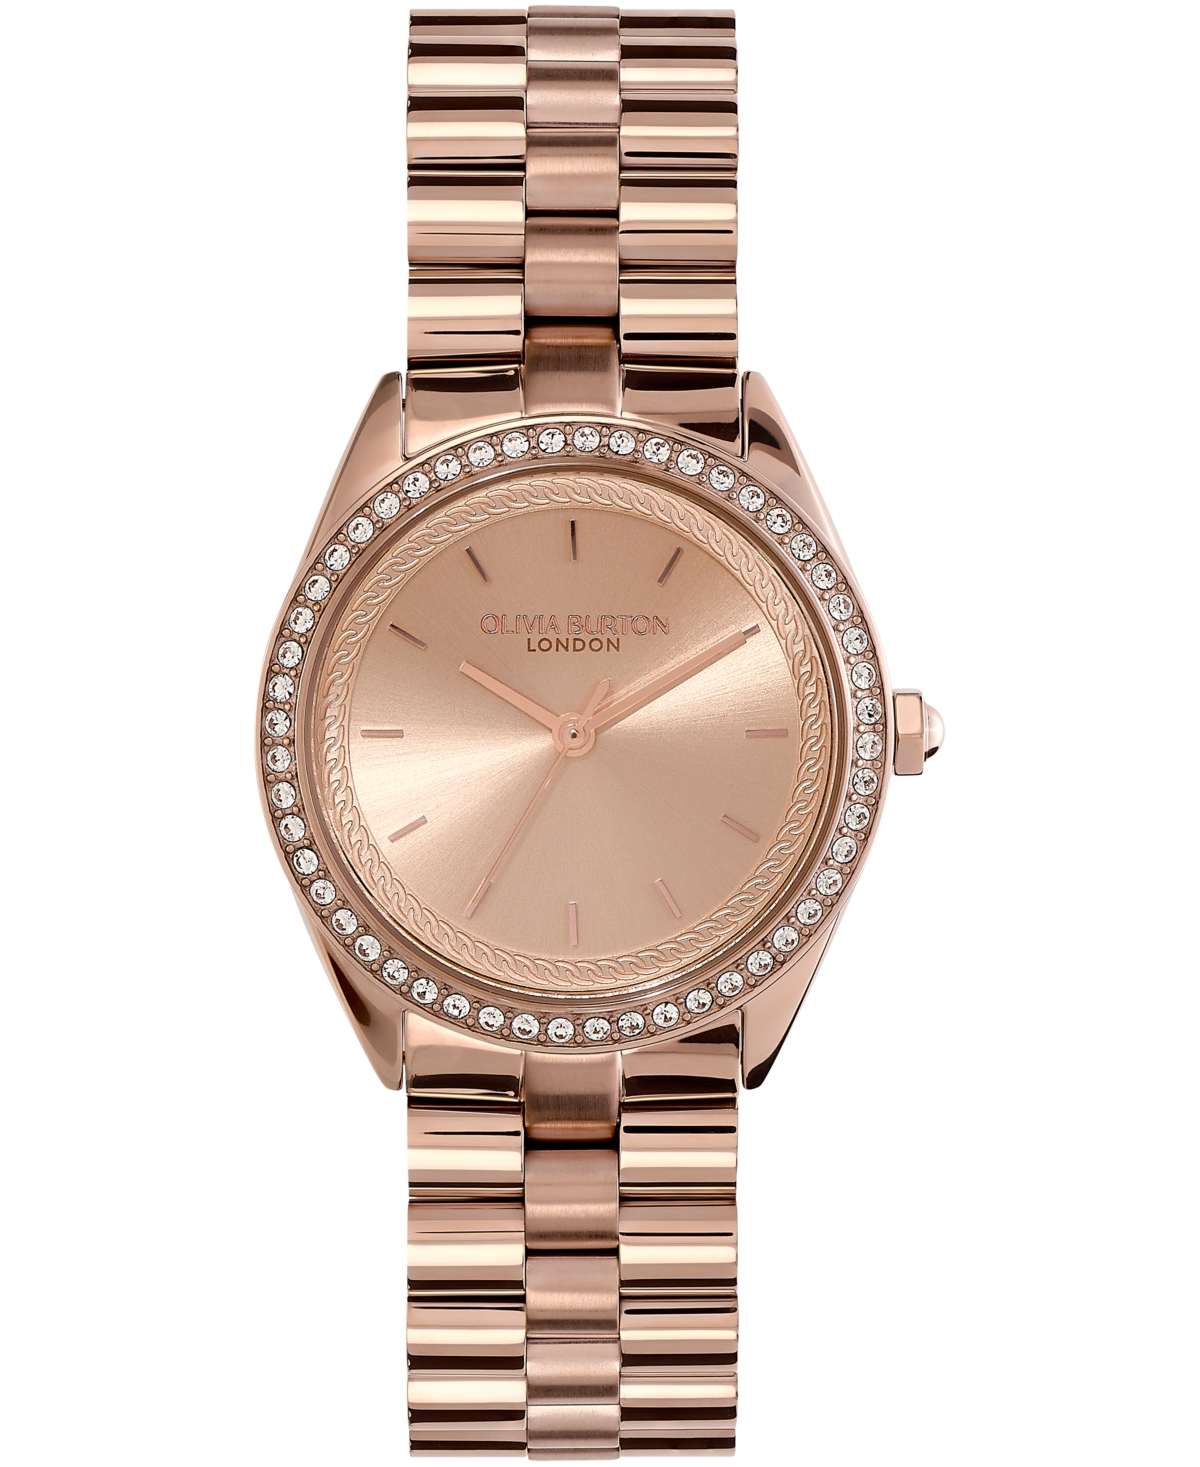 Women's Bejeweled Rose Gold-Tone Stainless Steel Watch 34mm - Rose Gold